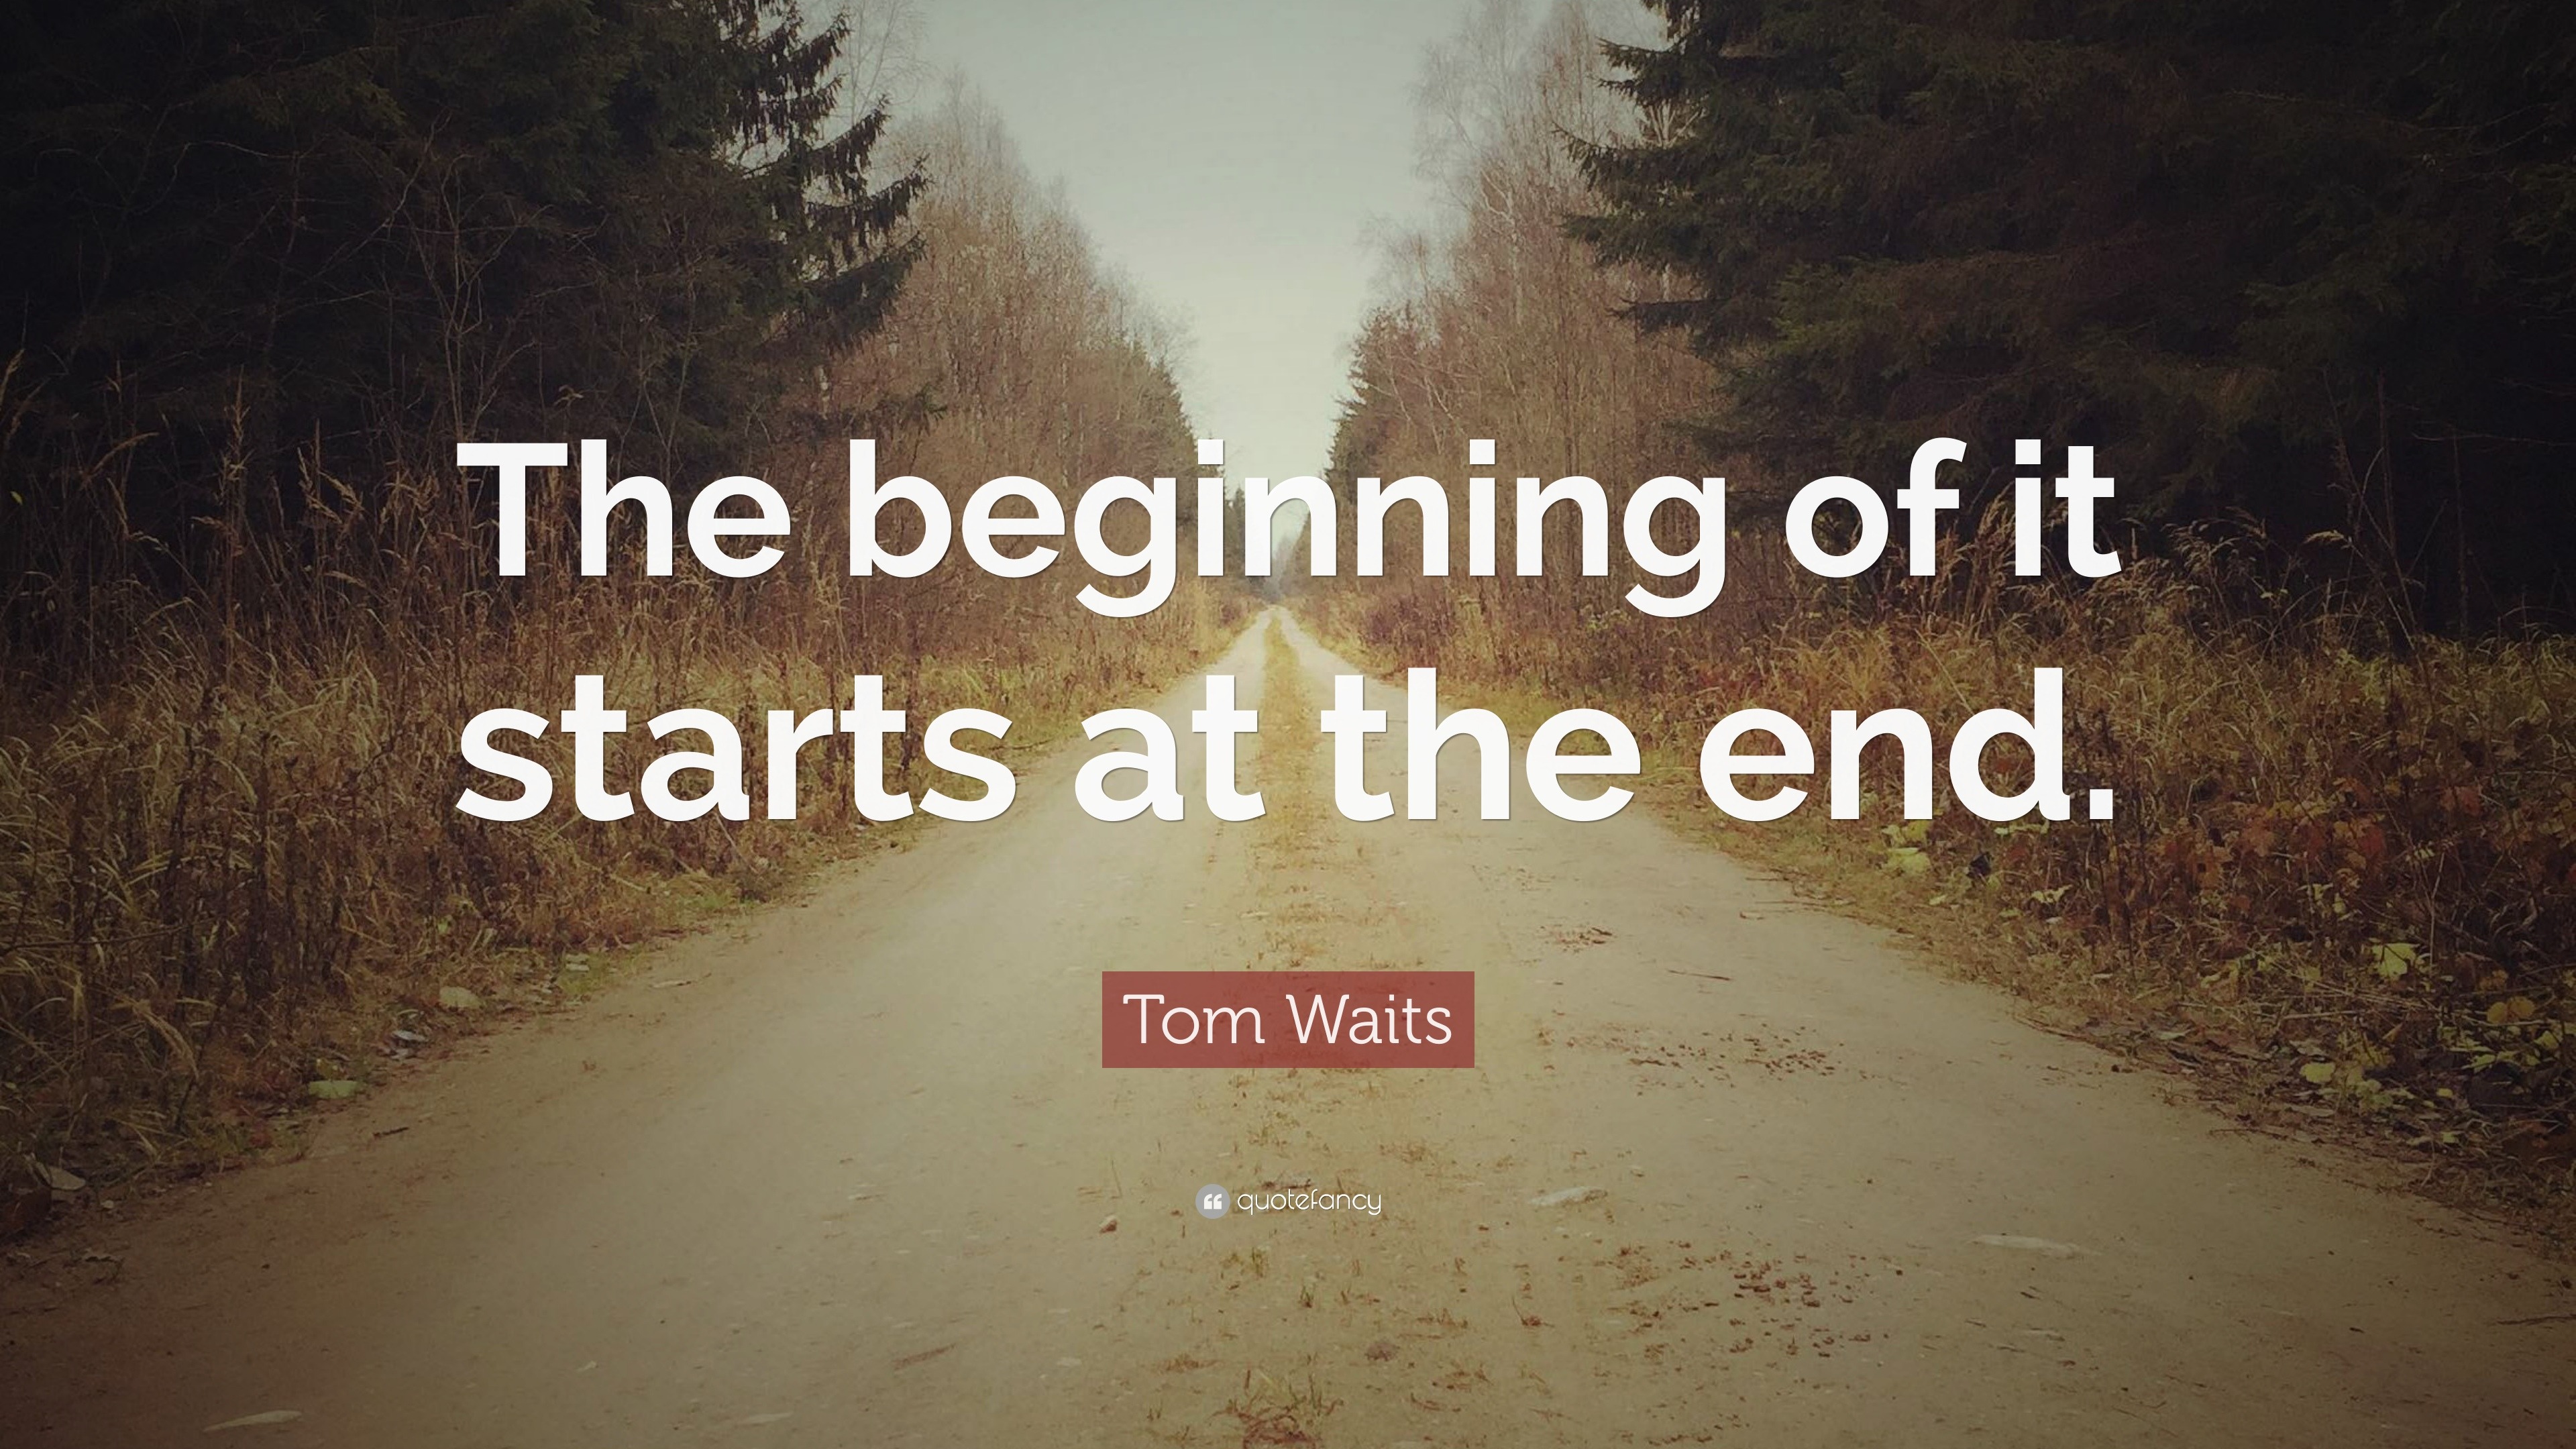 Tom Waits Quote: “The beginning of it starts at the end.” (7 wallpapers